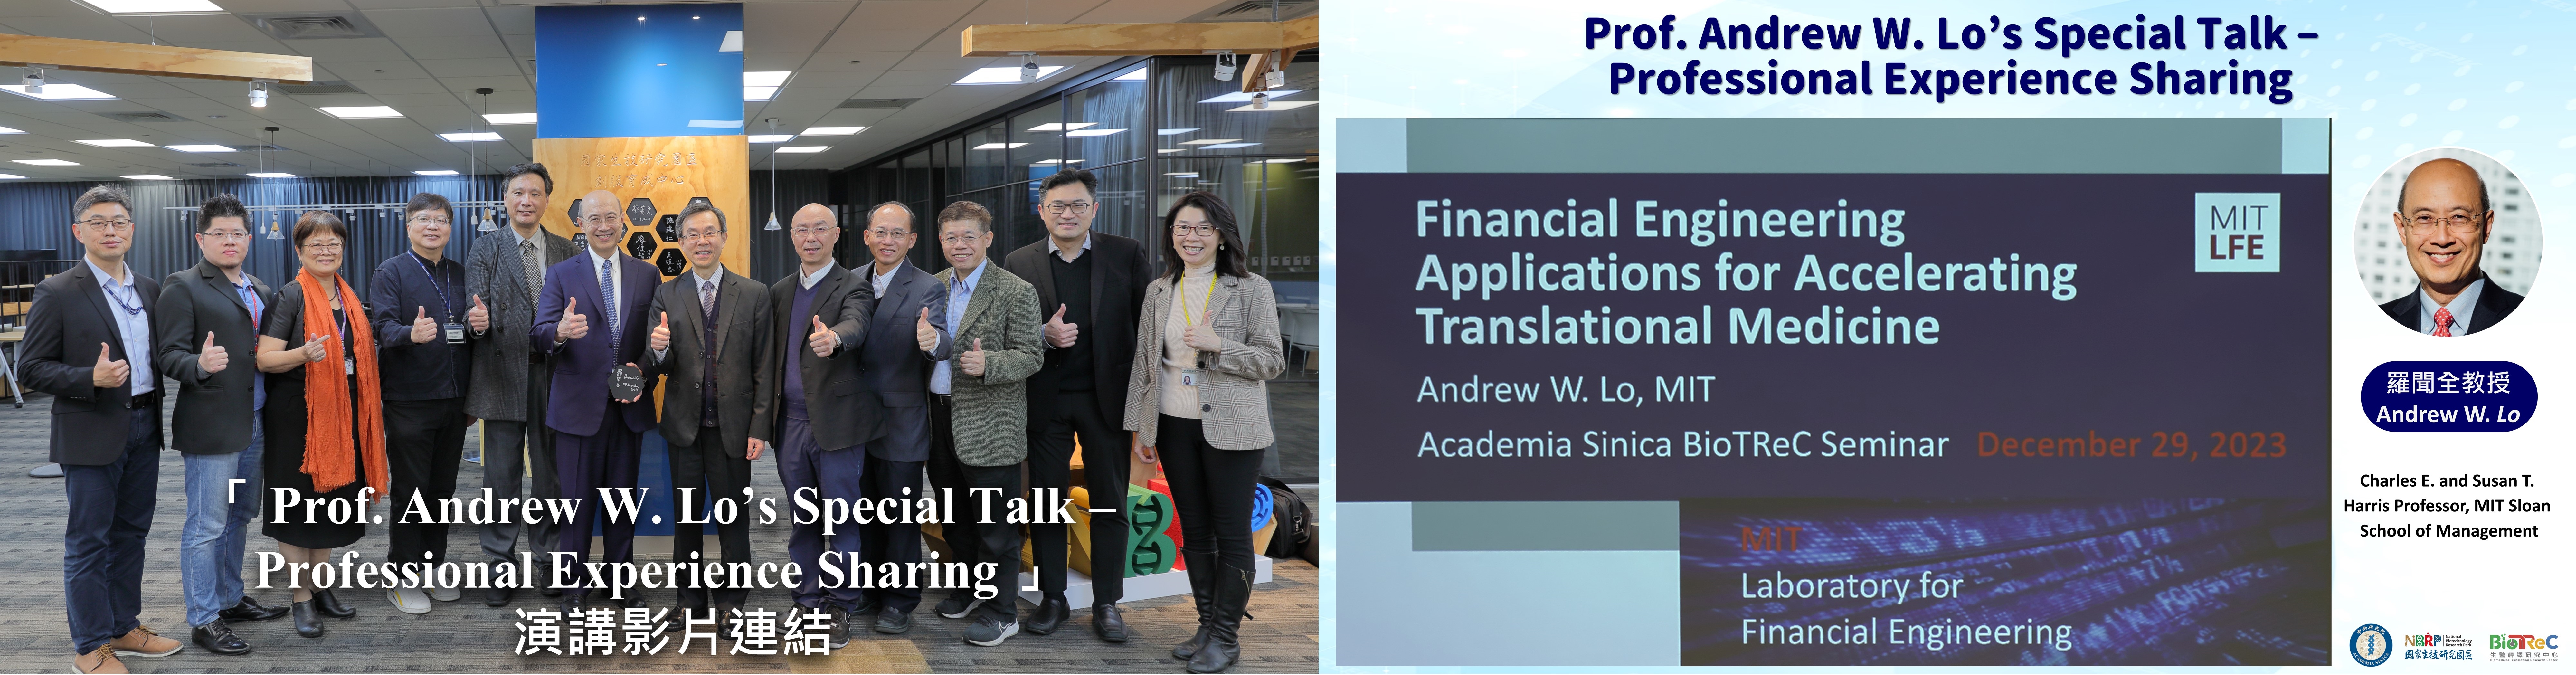 Prof. Andrew W Lo’s Special Talk – Professional Experience Sharing